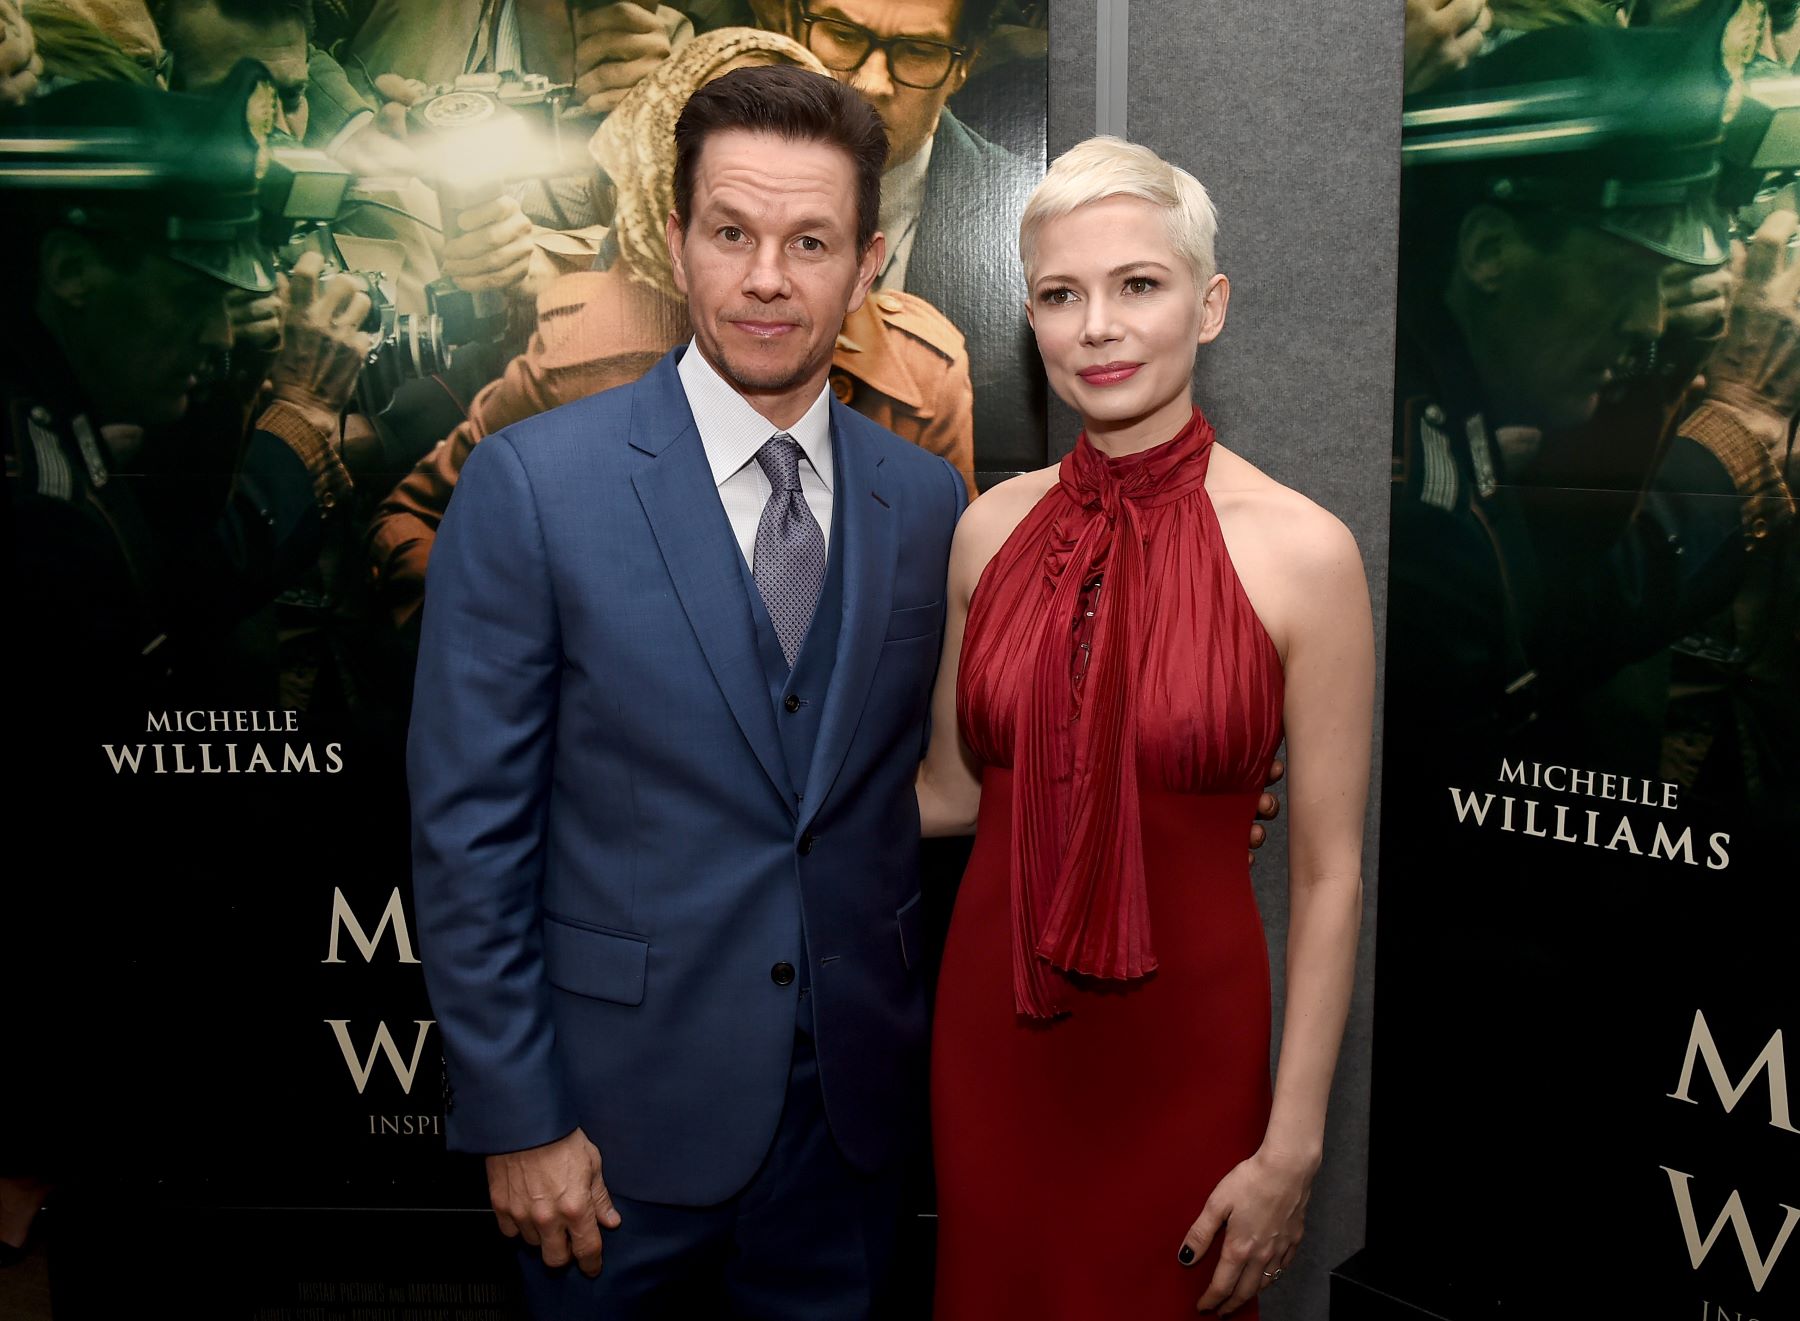 Mark Wahlberg and Michelle Williams at 'All the Money in the World' premiere at the Samuel Goldwyn Theater